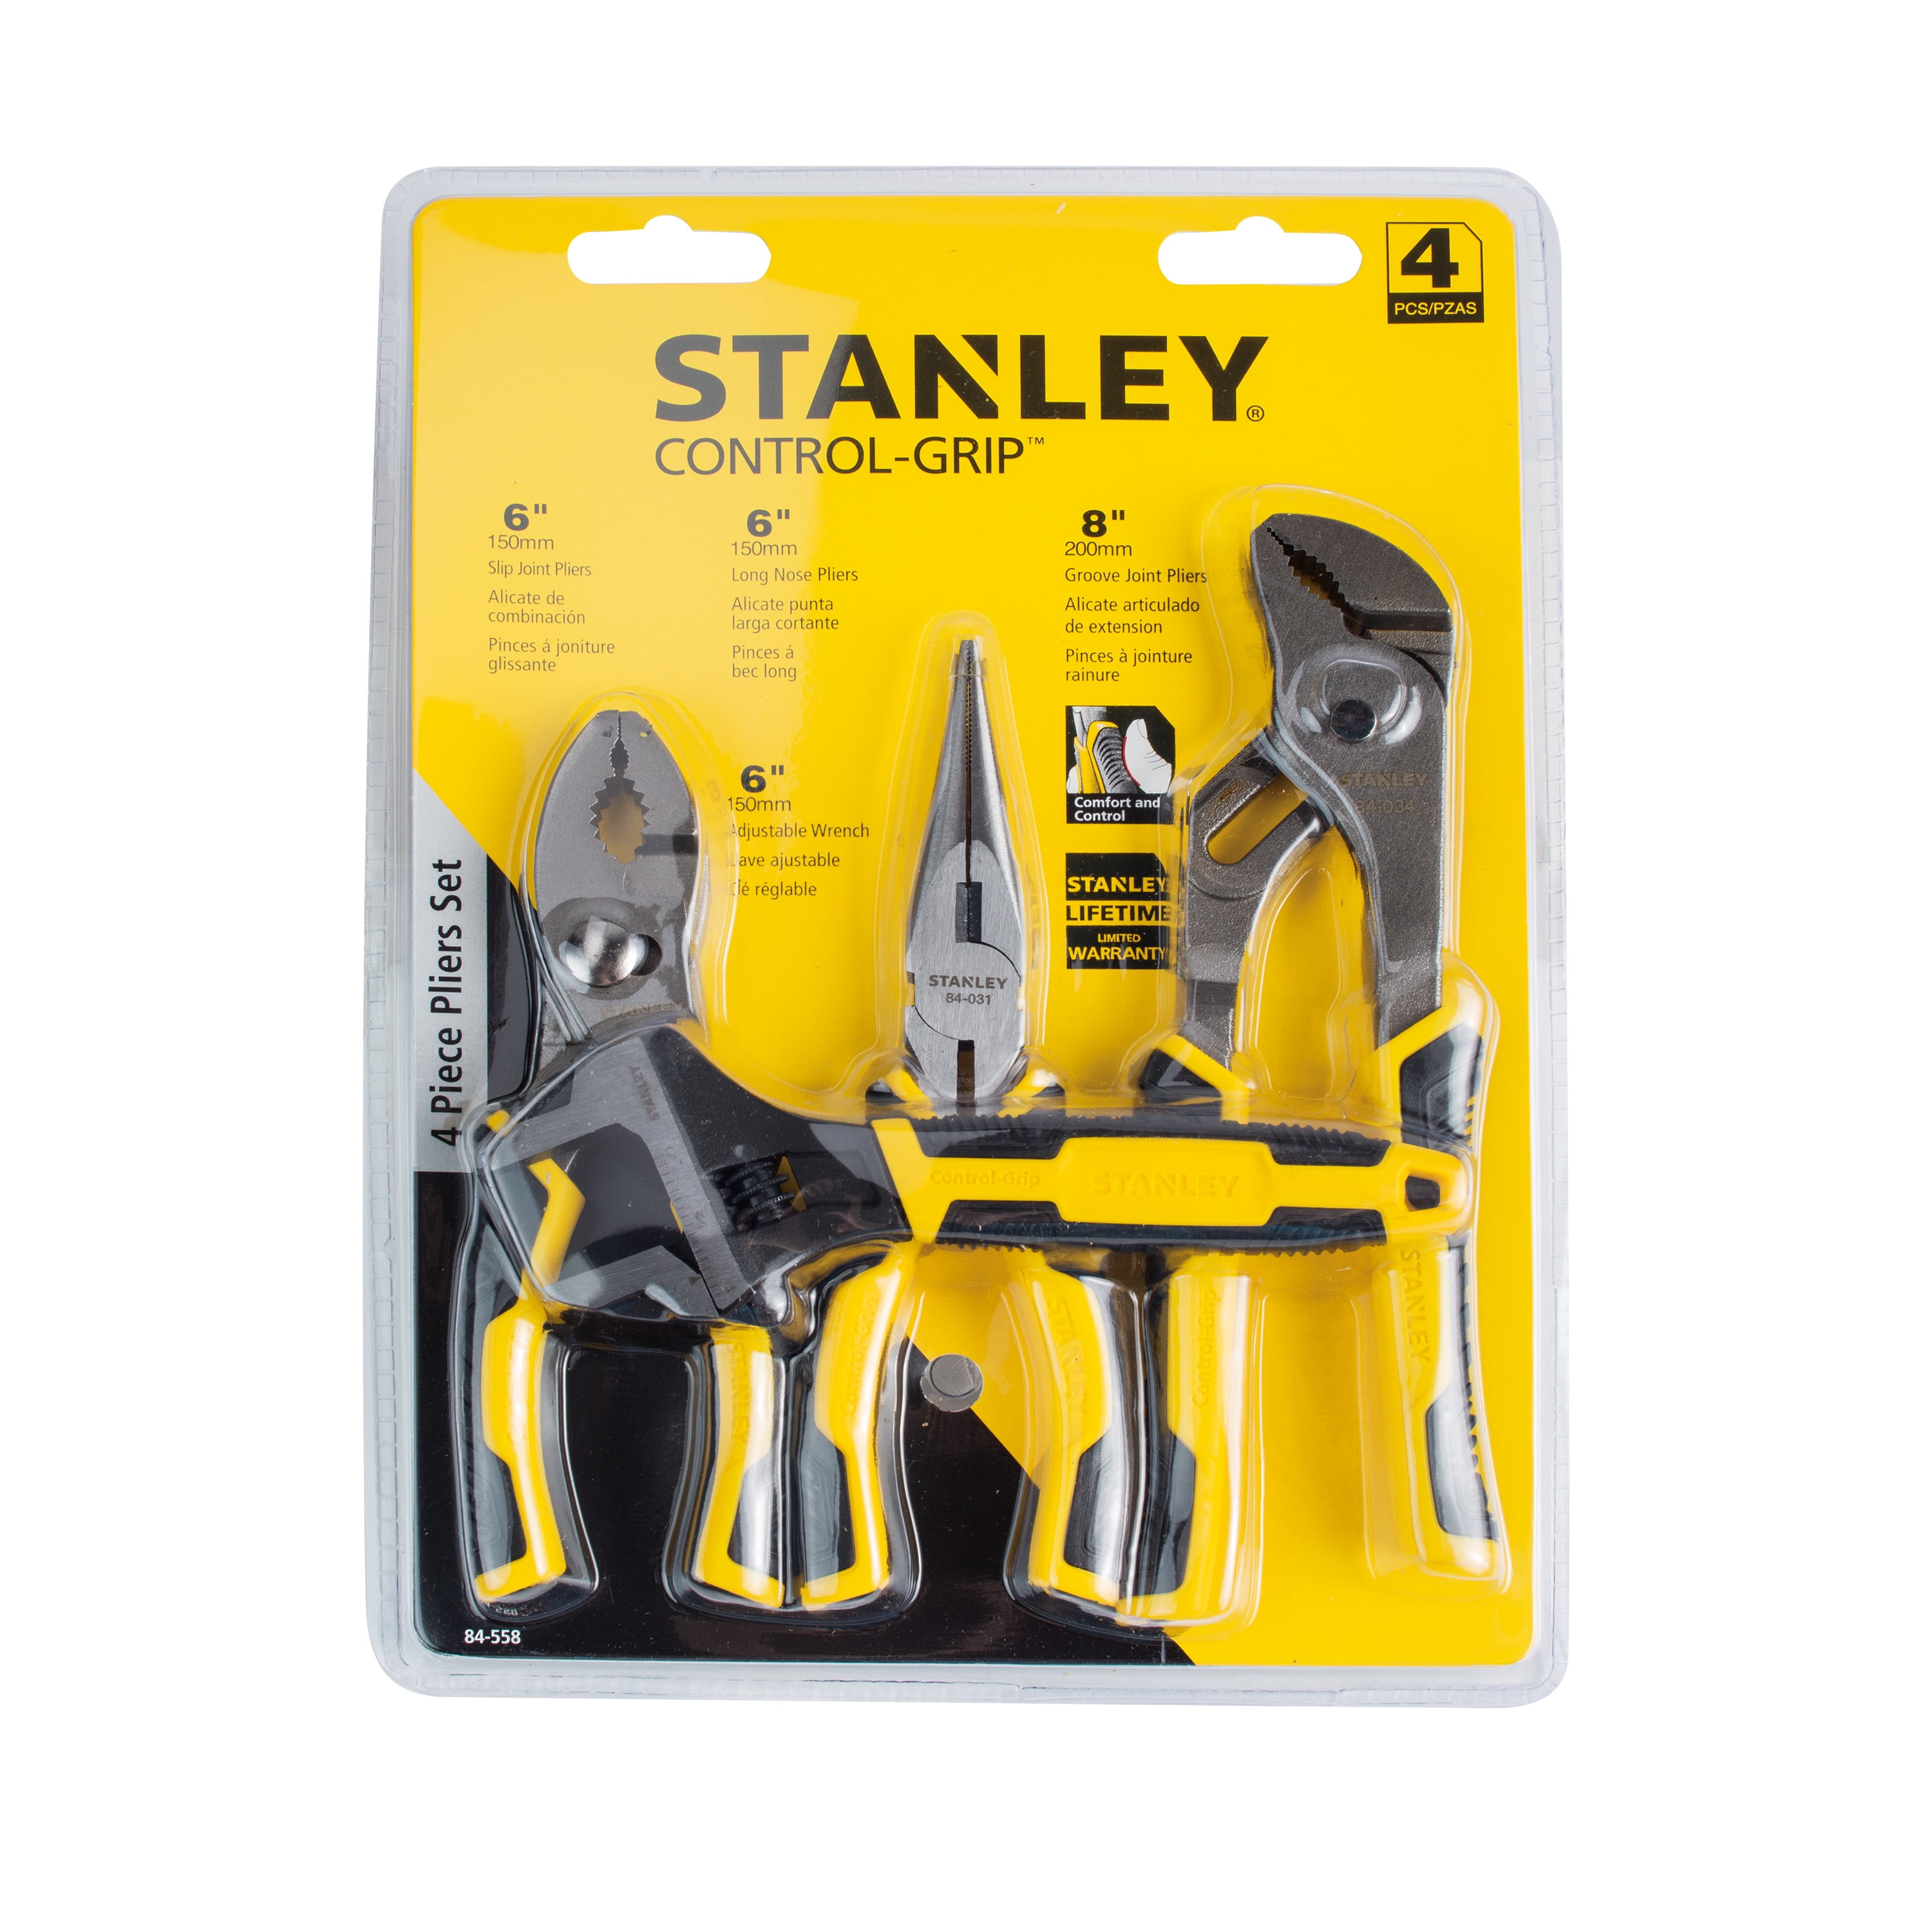 84-558 Plier Sets Tool 4-Piece STANLEY and Set Wrench Adjustable